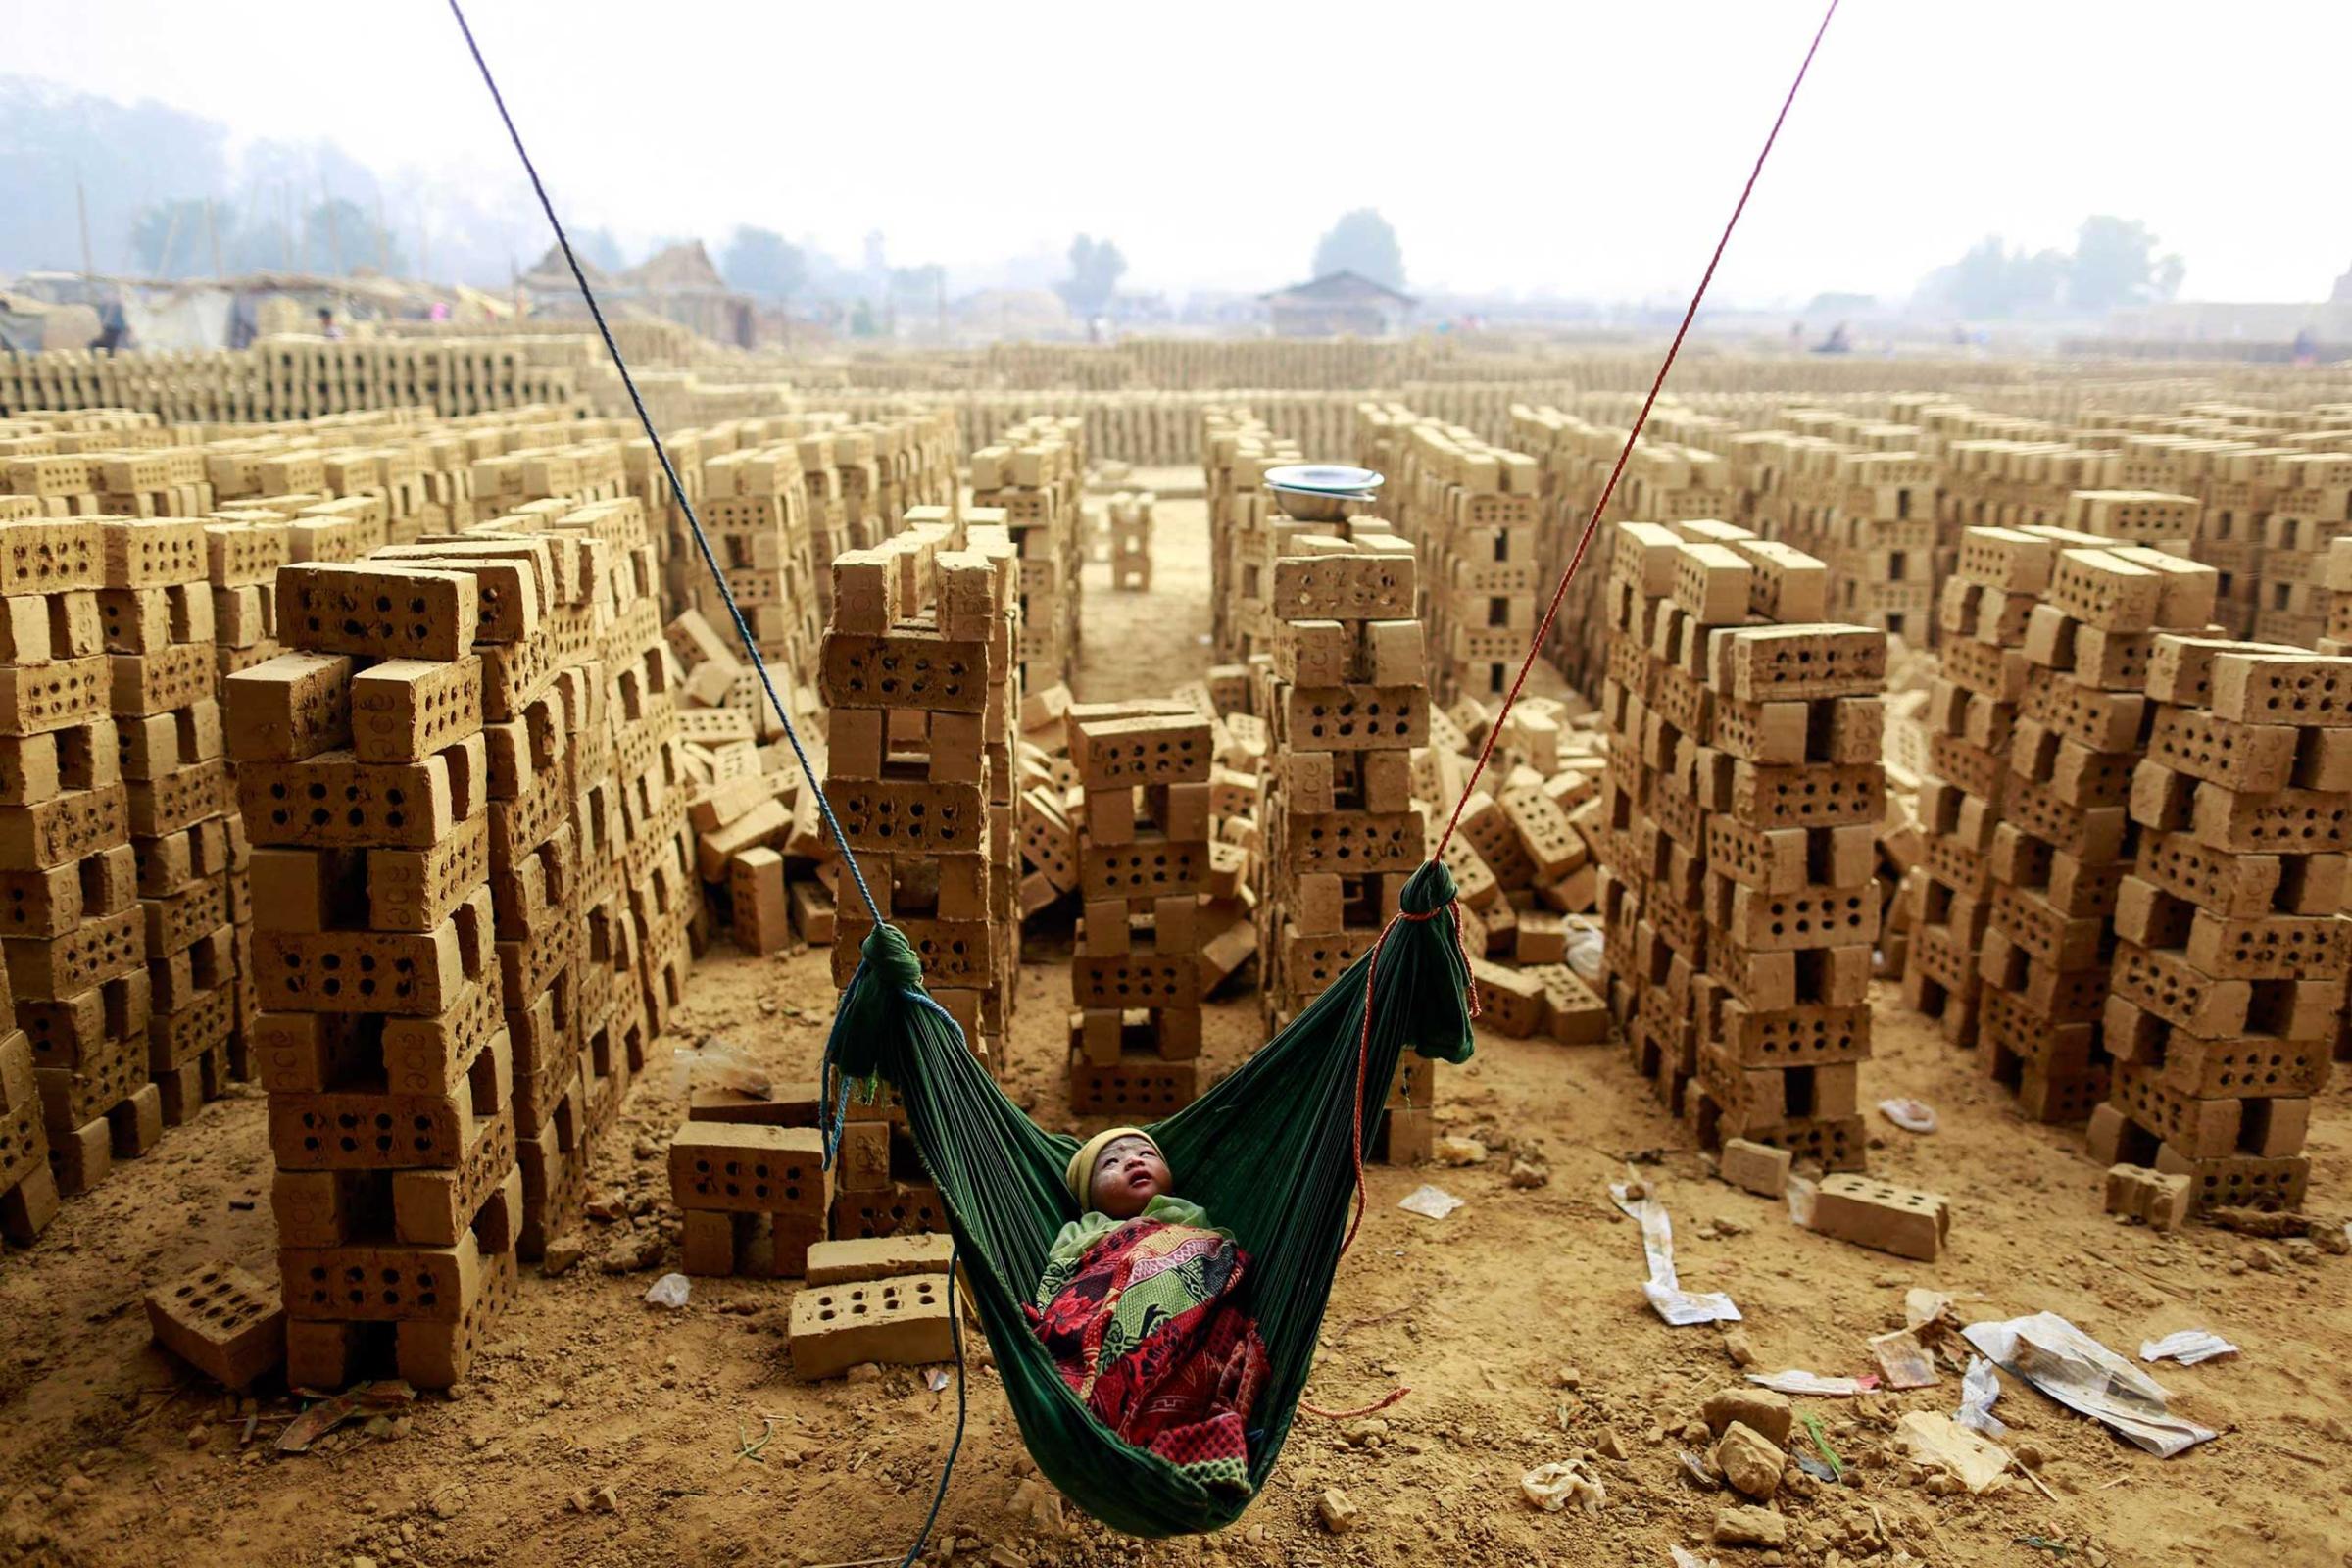 A boy sleeps in a hammock while his mother works at a brick kiln on the outskirts of Yangon